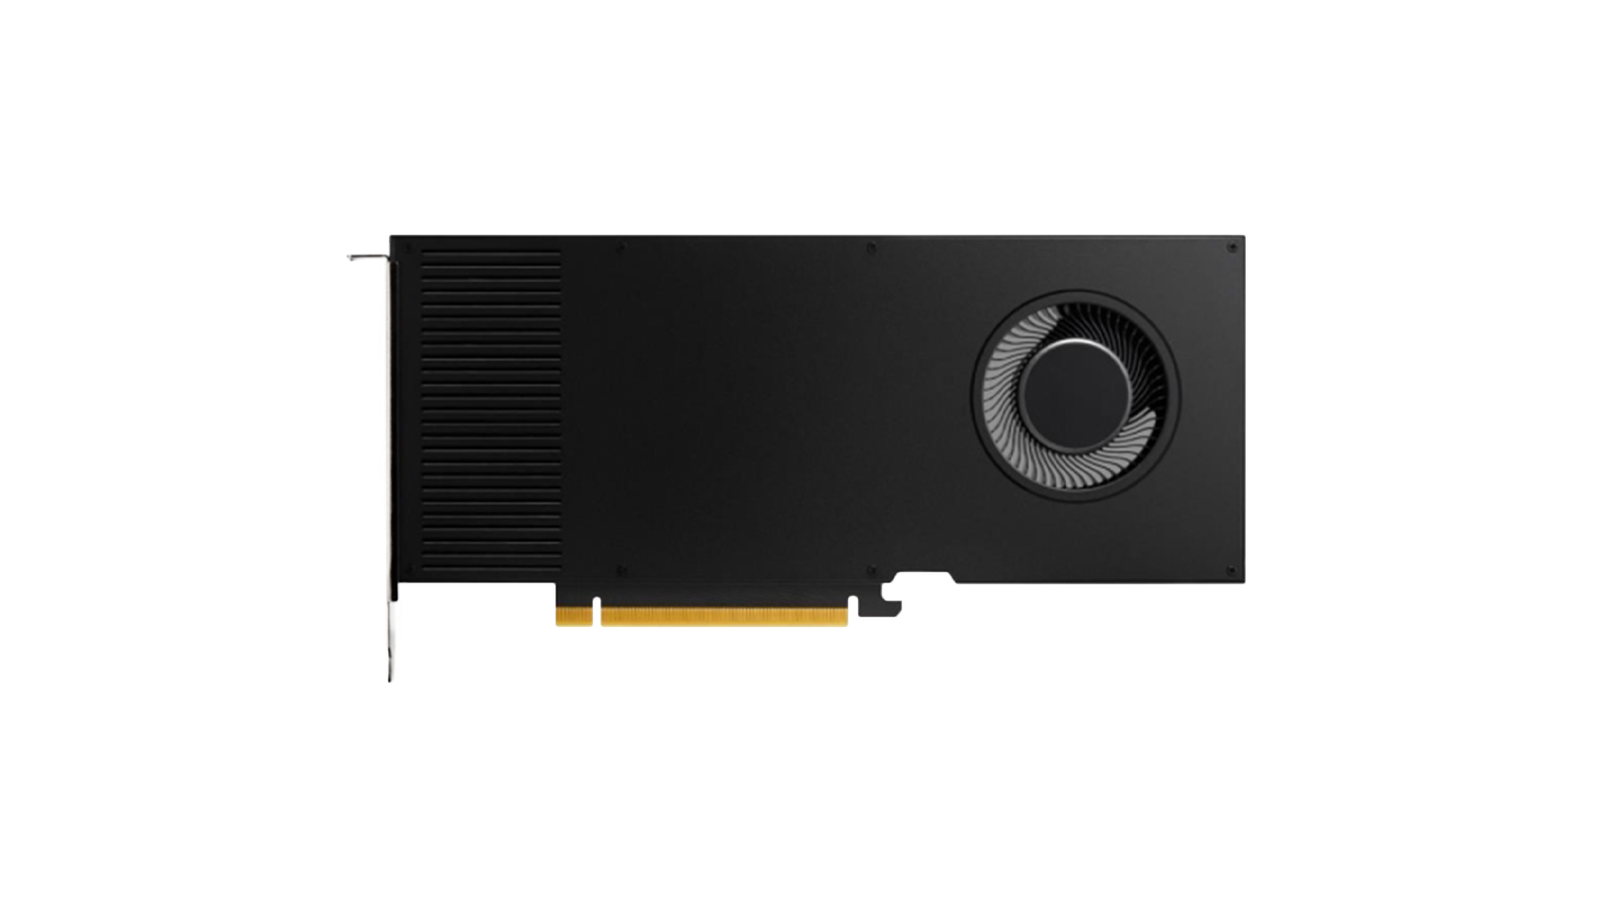 Nvidia RTX A4000 - The most cost-effective professional graphics card for video editing